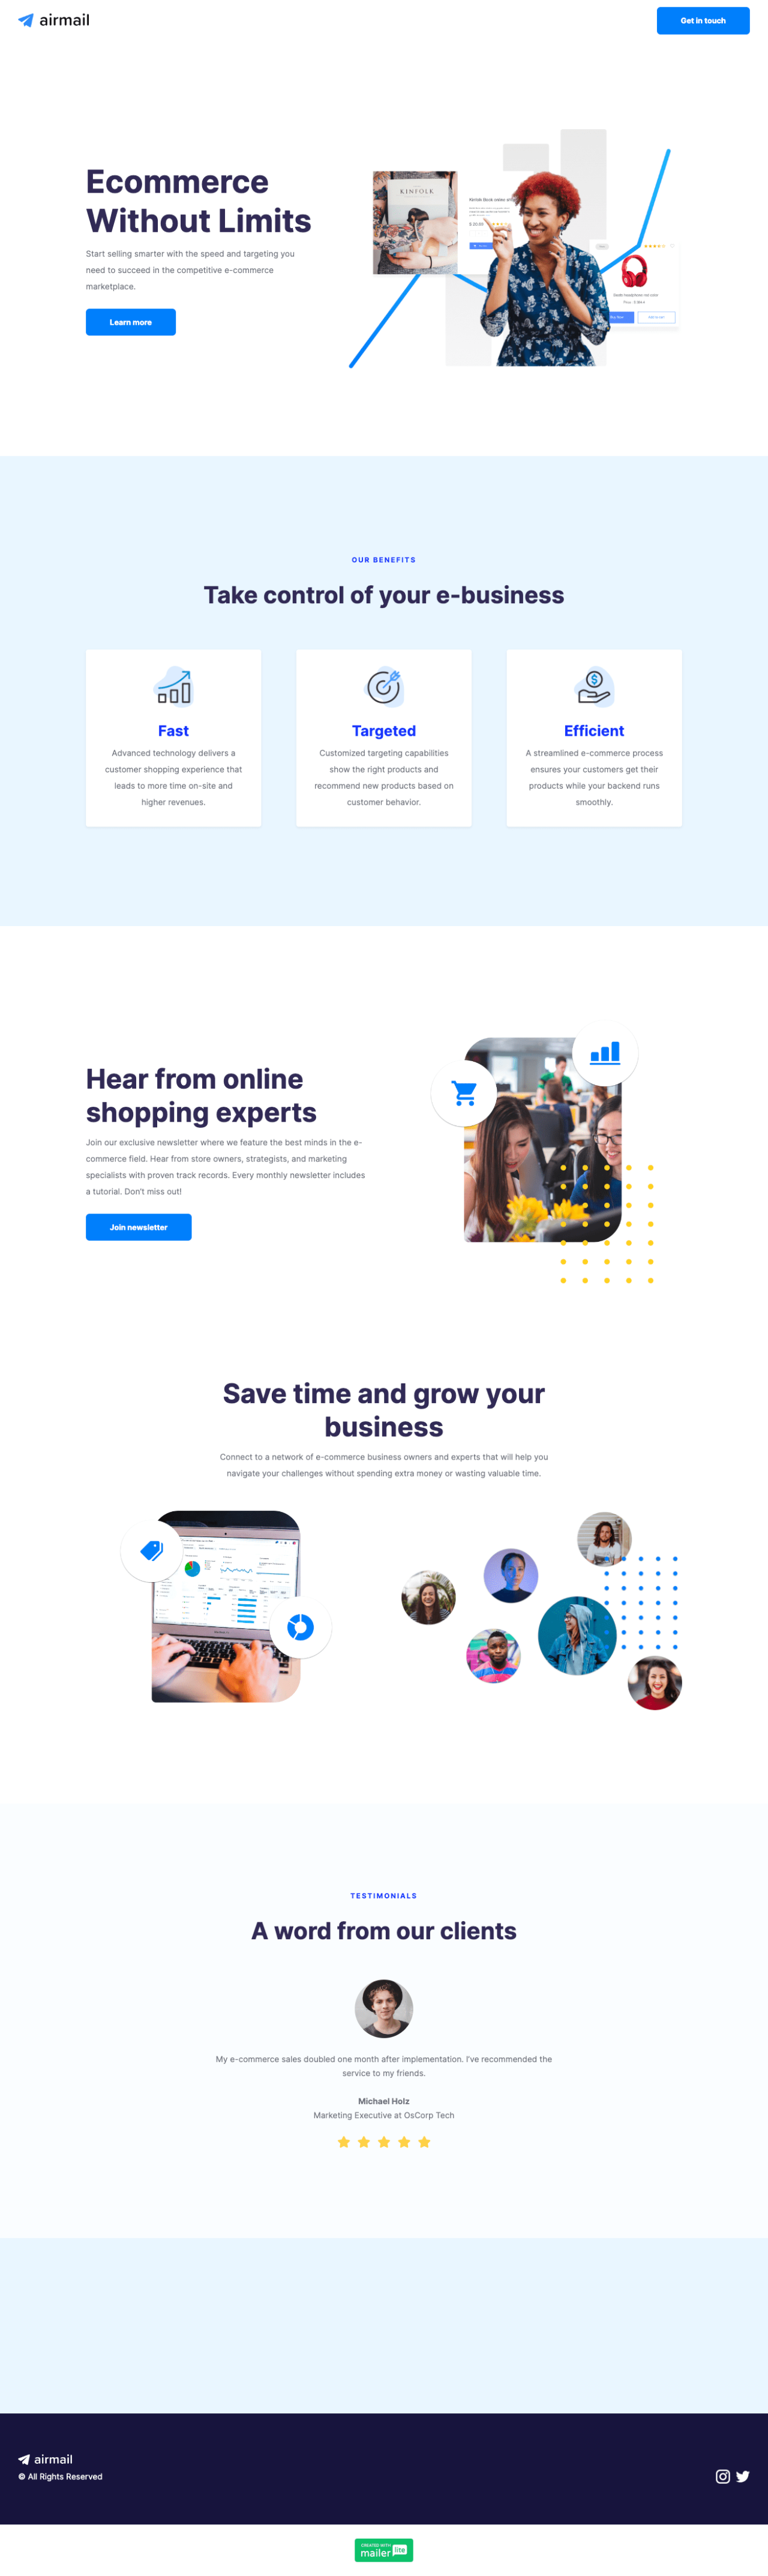 E-commerce newsletter template - Made by MailerLite